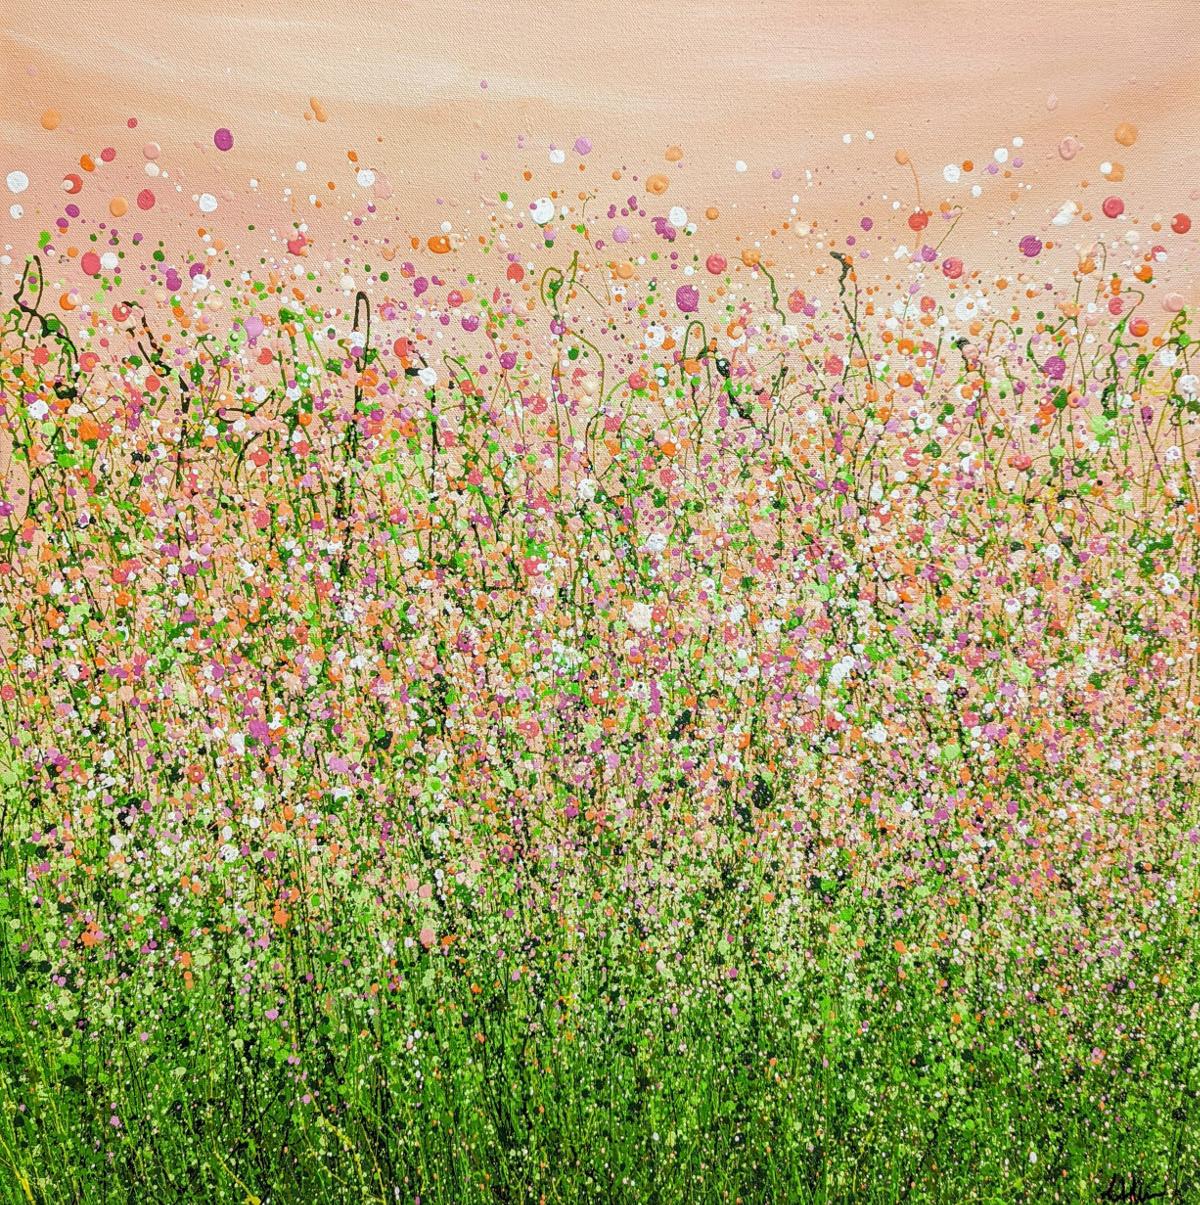 Peaches & Cream Meadow Delight #2 An Original semi-abstract painting by Lucy Moore. Using my signature stringy grass technique I have created a bountiful vibrant meadow with an abstract twist. I used a predominantly Peach, Pink, orange and green